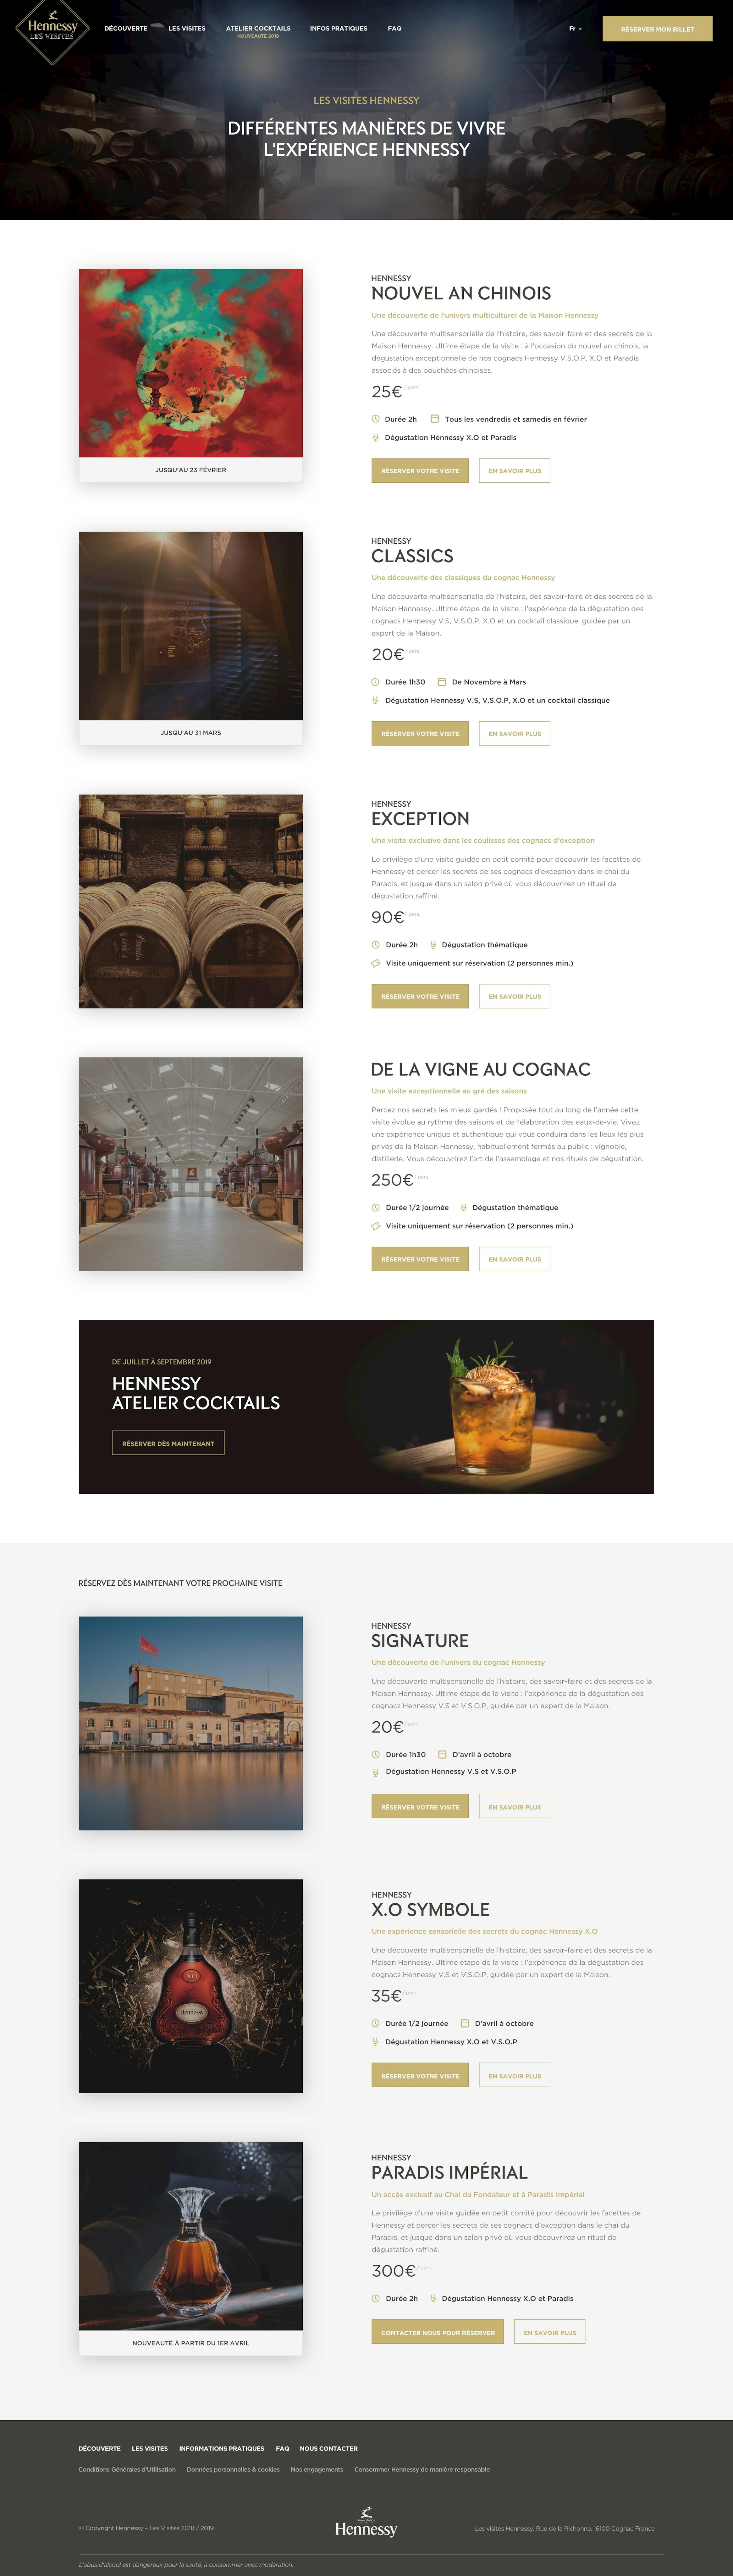 Design of Hennessy website for guided cognac tours 